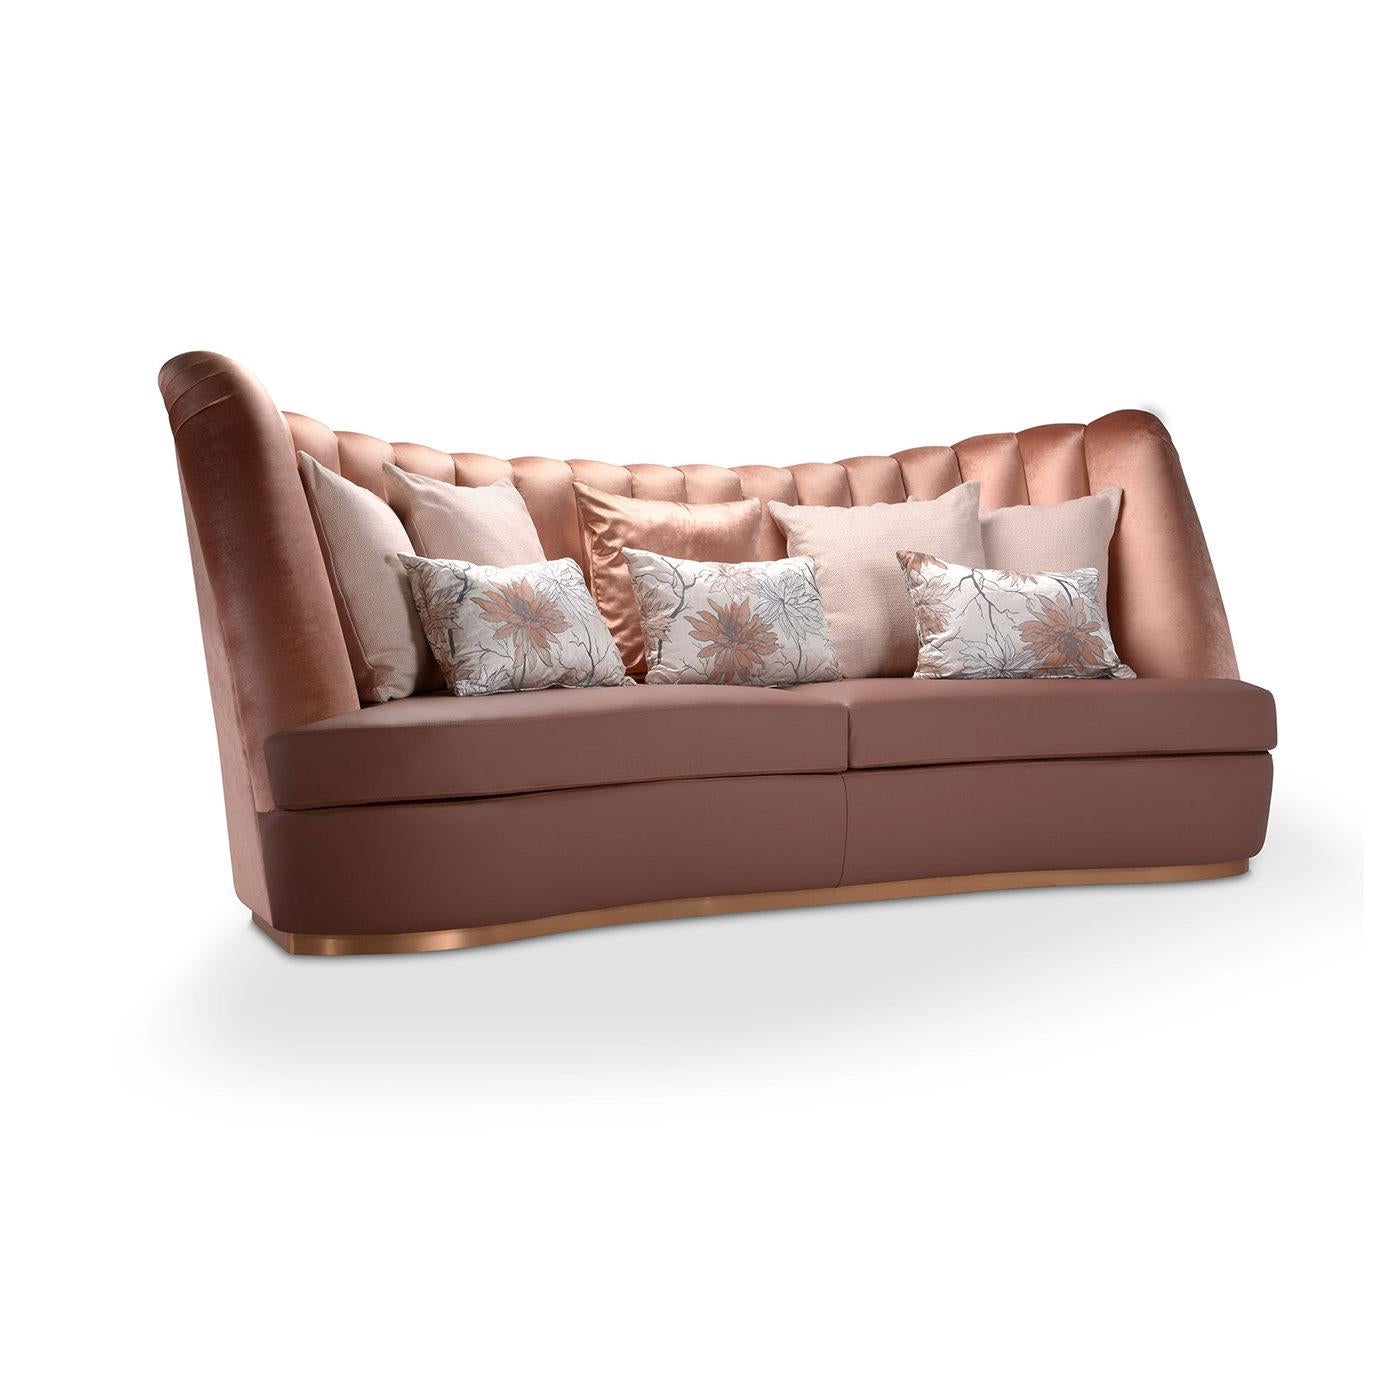 Thalia, one of the nine Greek muses and patron of comedy, inspired the whimsical design of this artisan, three-seater sofa, marked by sinuous curves and a stunning fluted texture enlivening the imposing backrest covered in brown velvet. The wooden